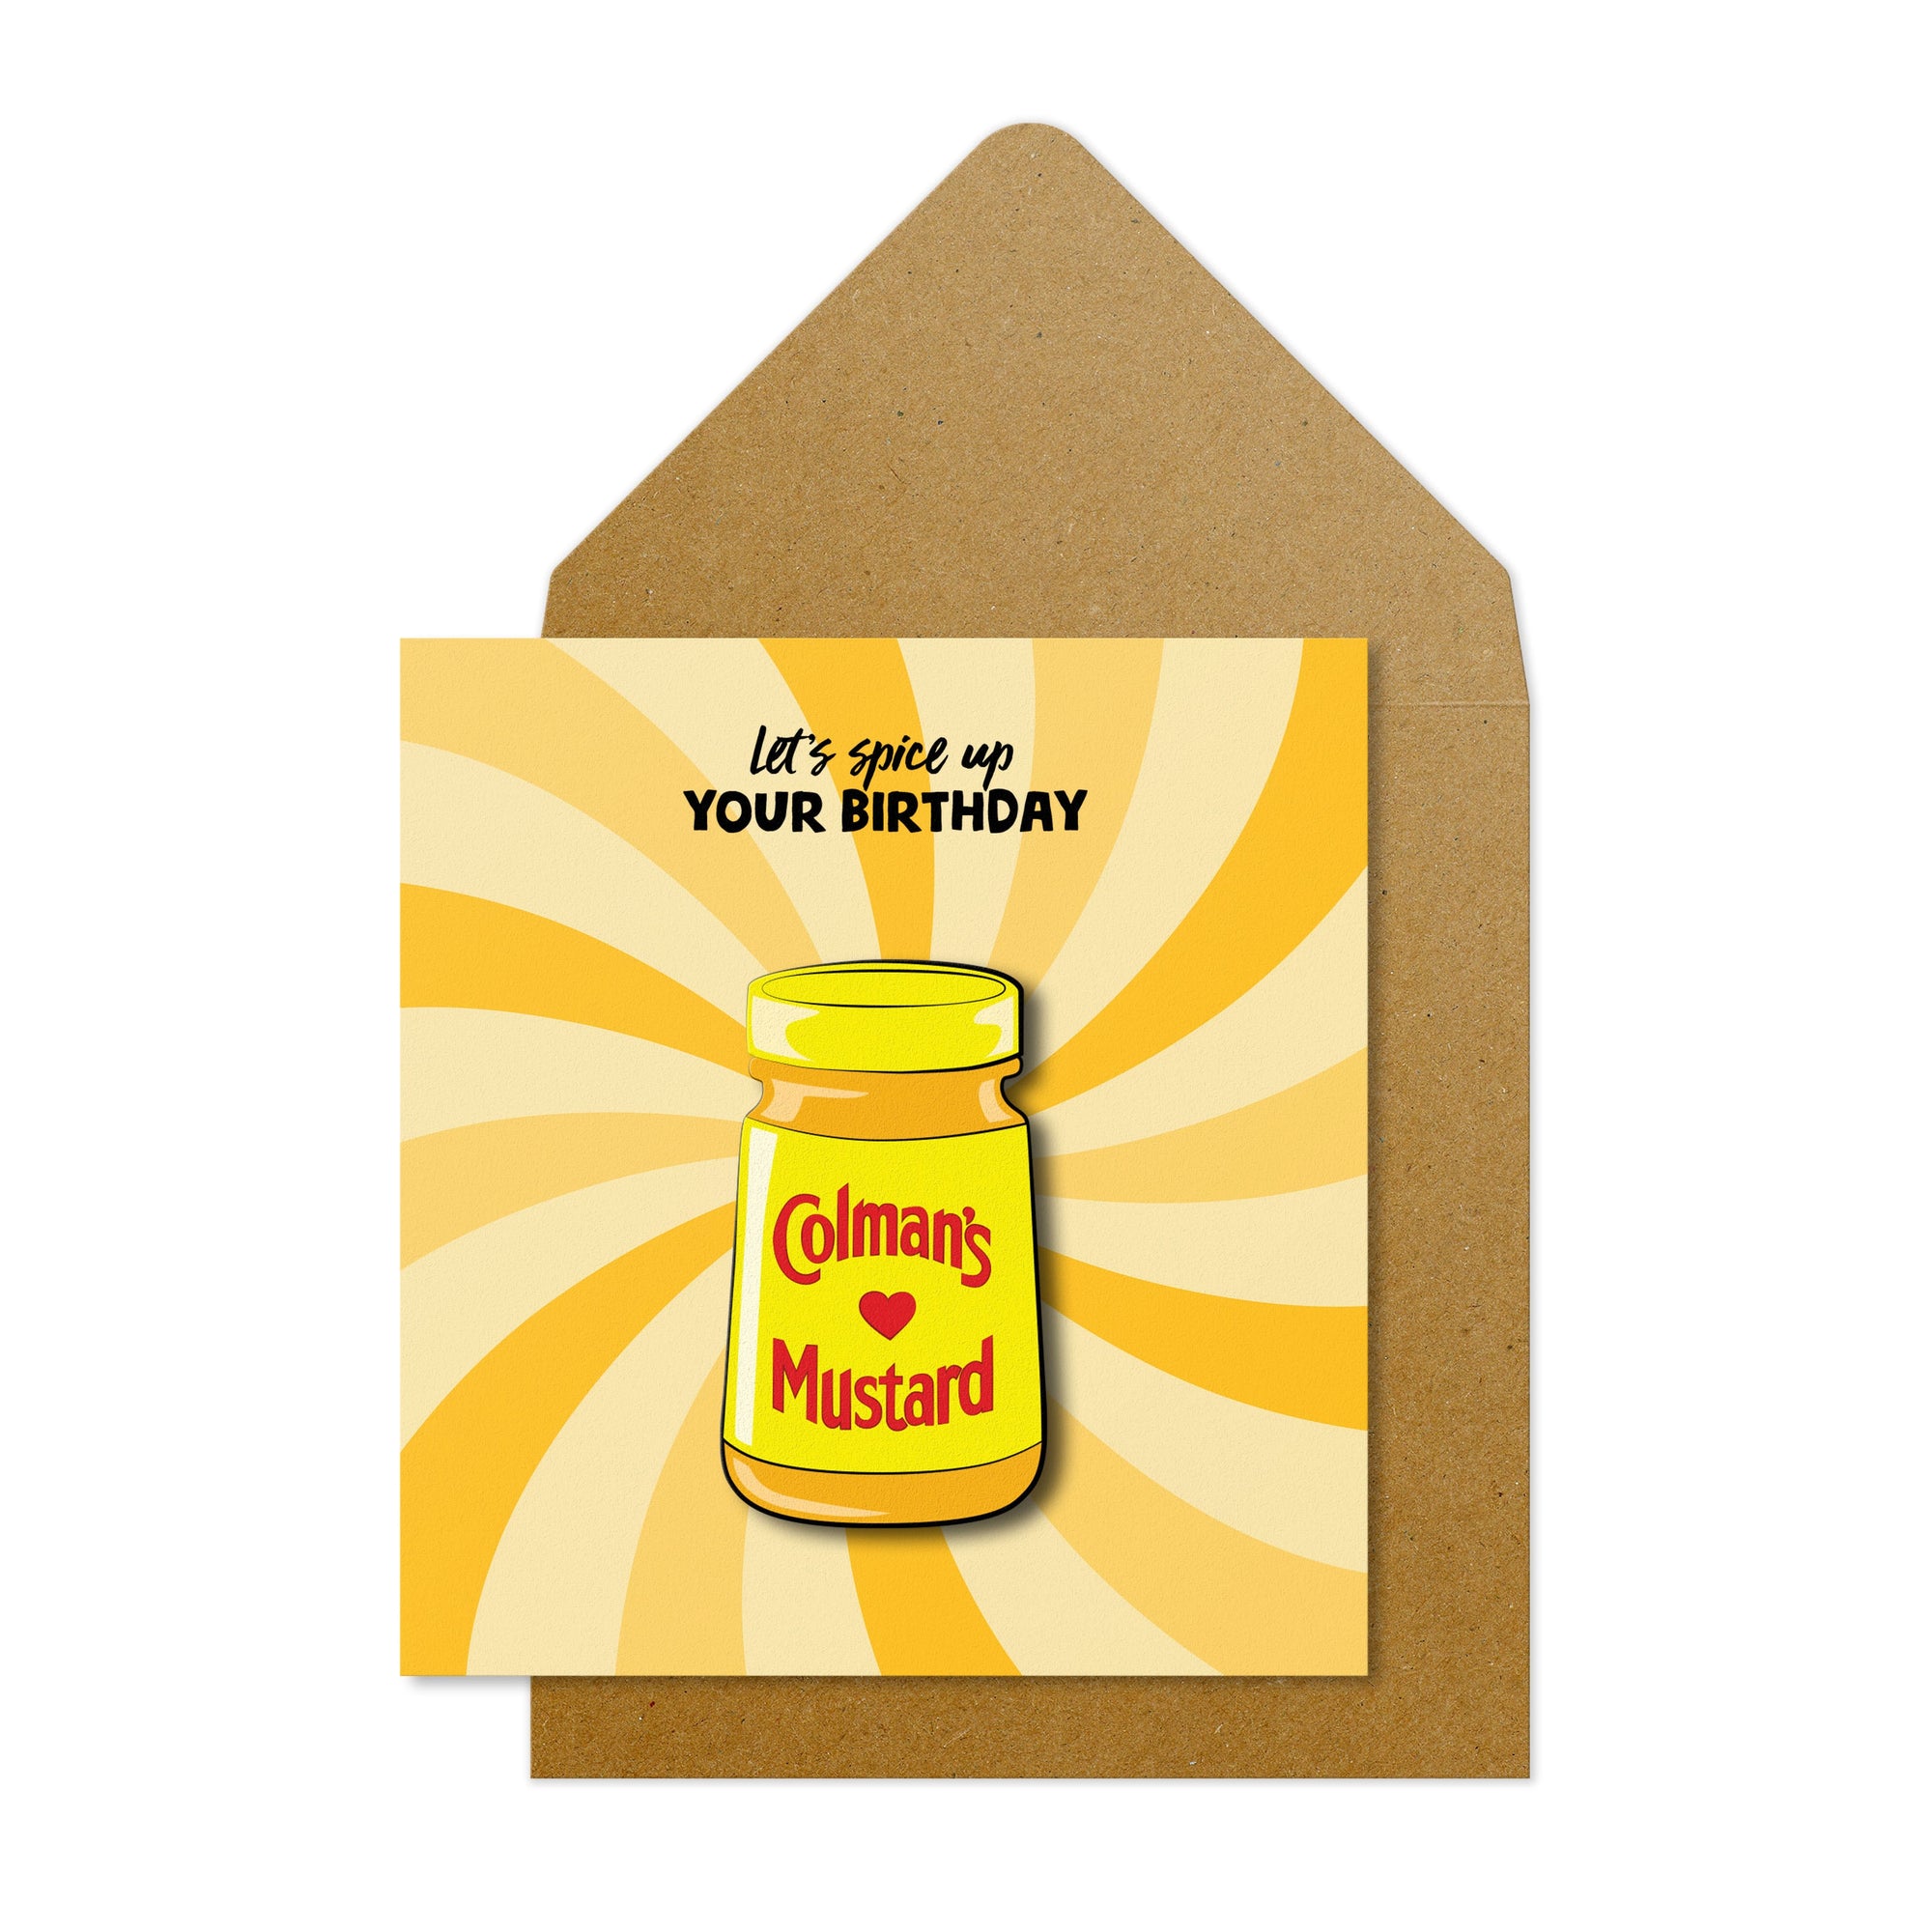 Let's spice up your birthday' Colmans Mustard